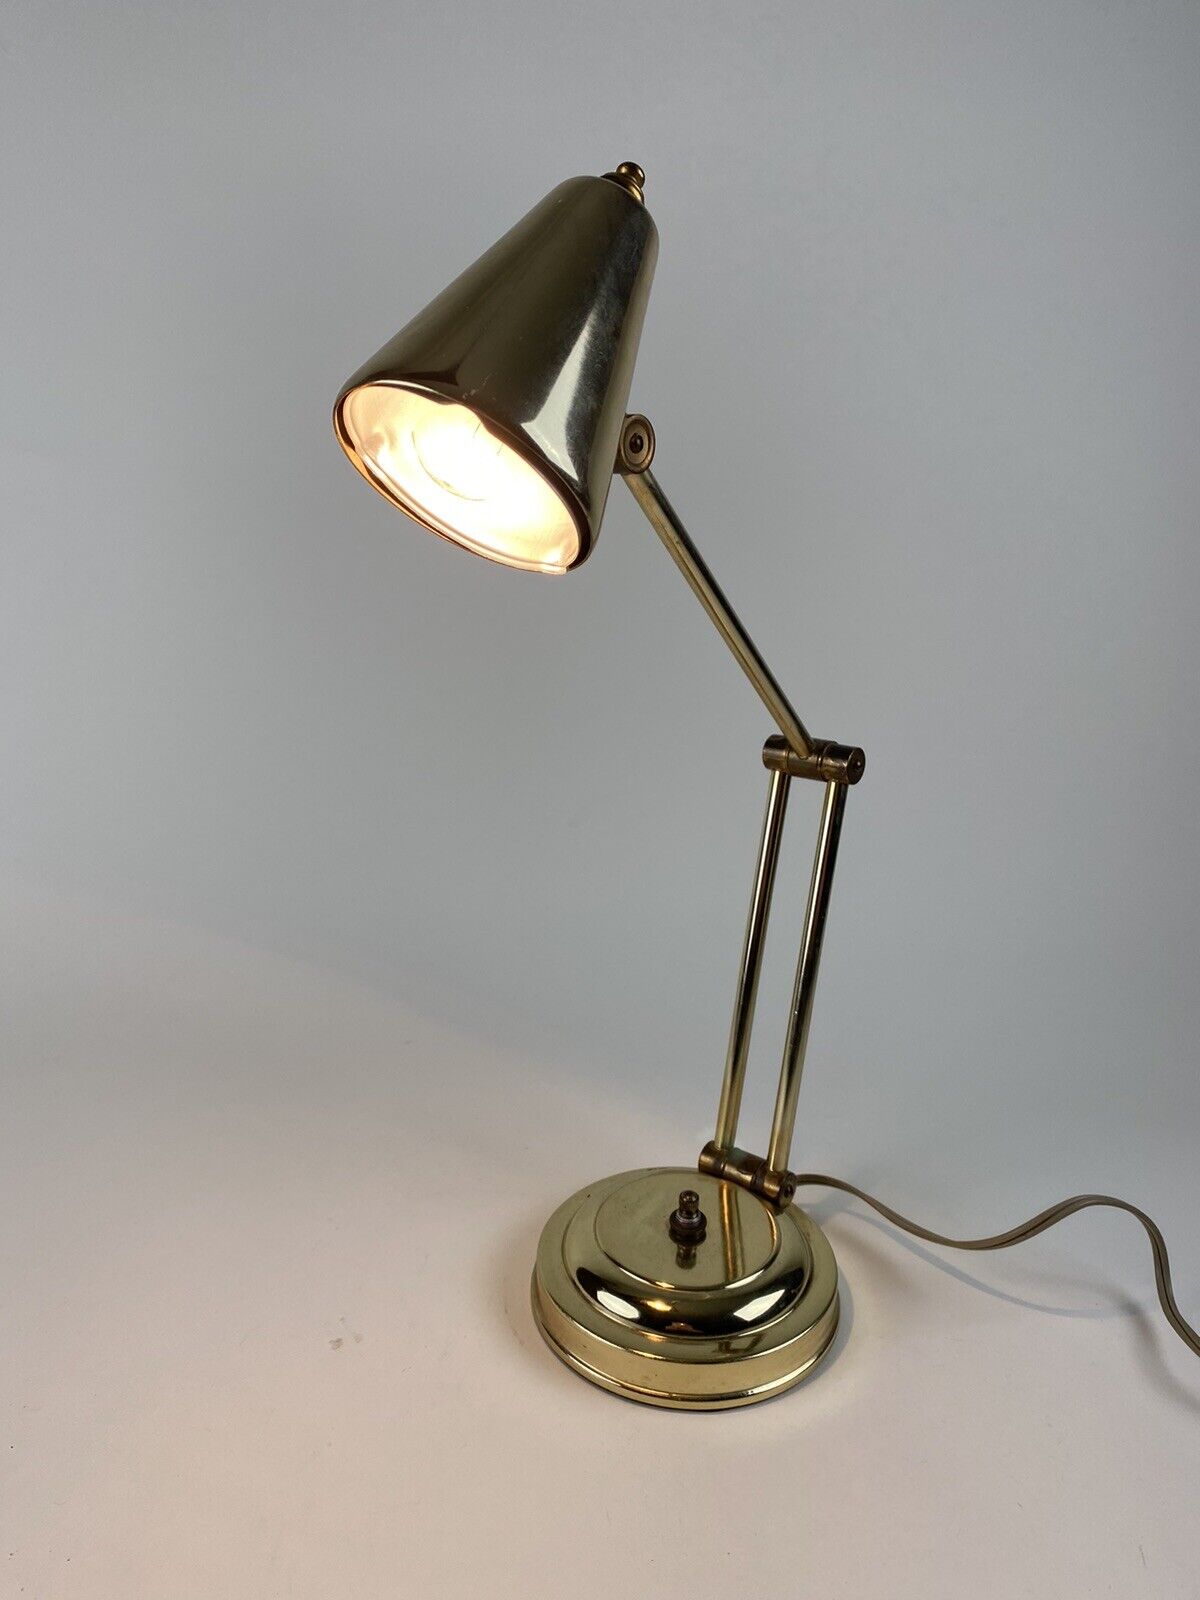 Vintage Brass Articulated Desk Lamp Architect Pharmacy Research Handsome